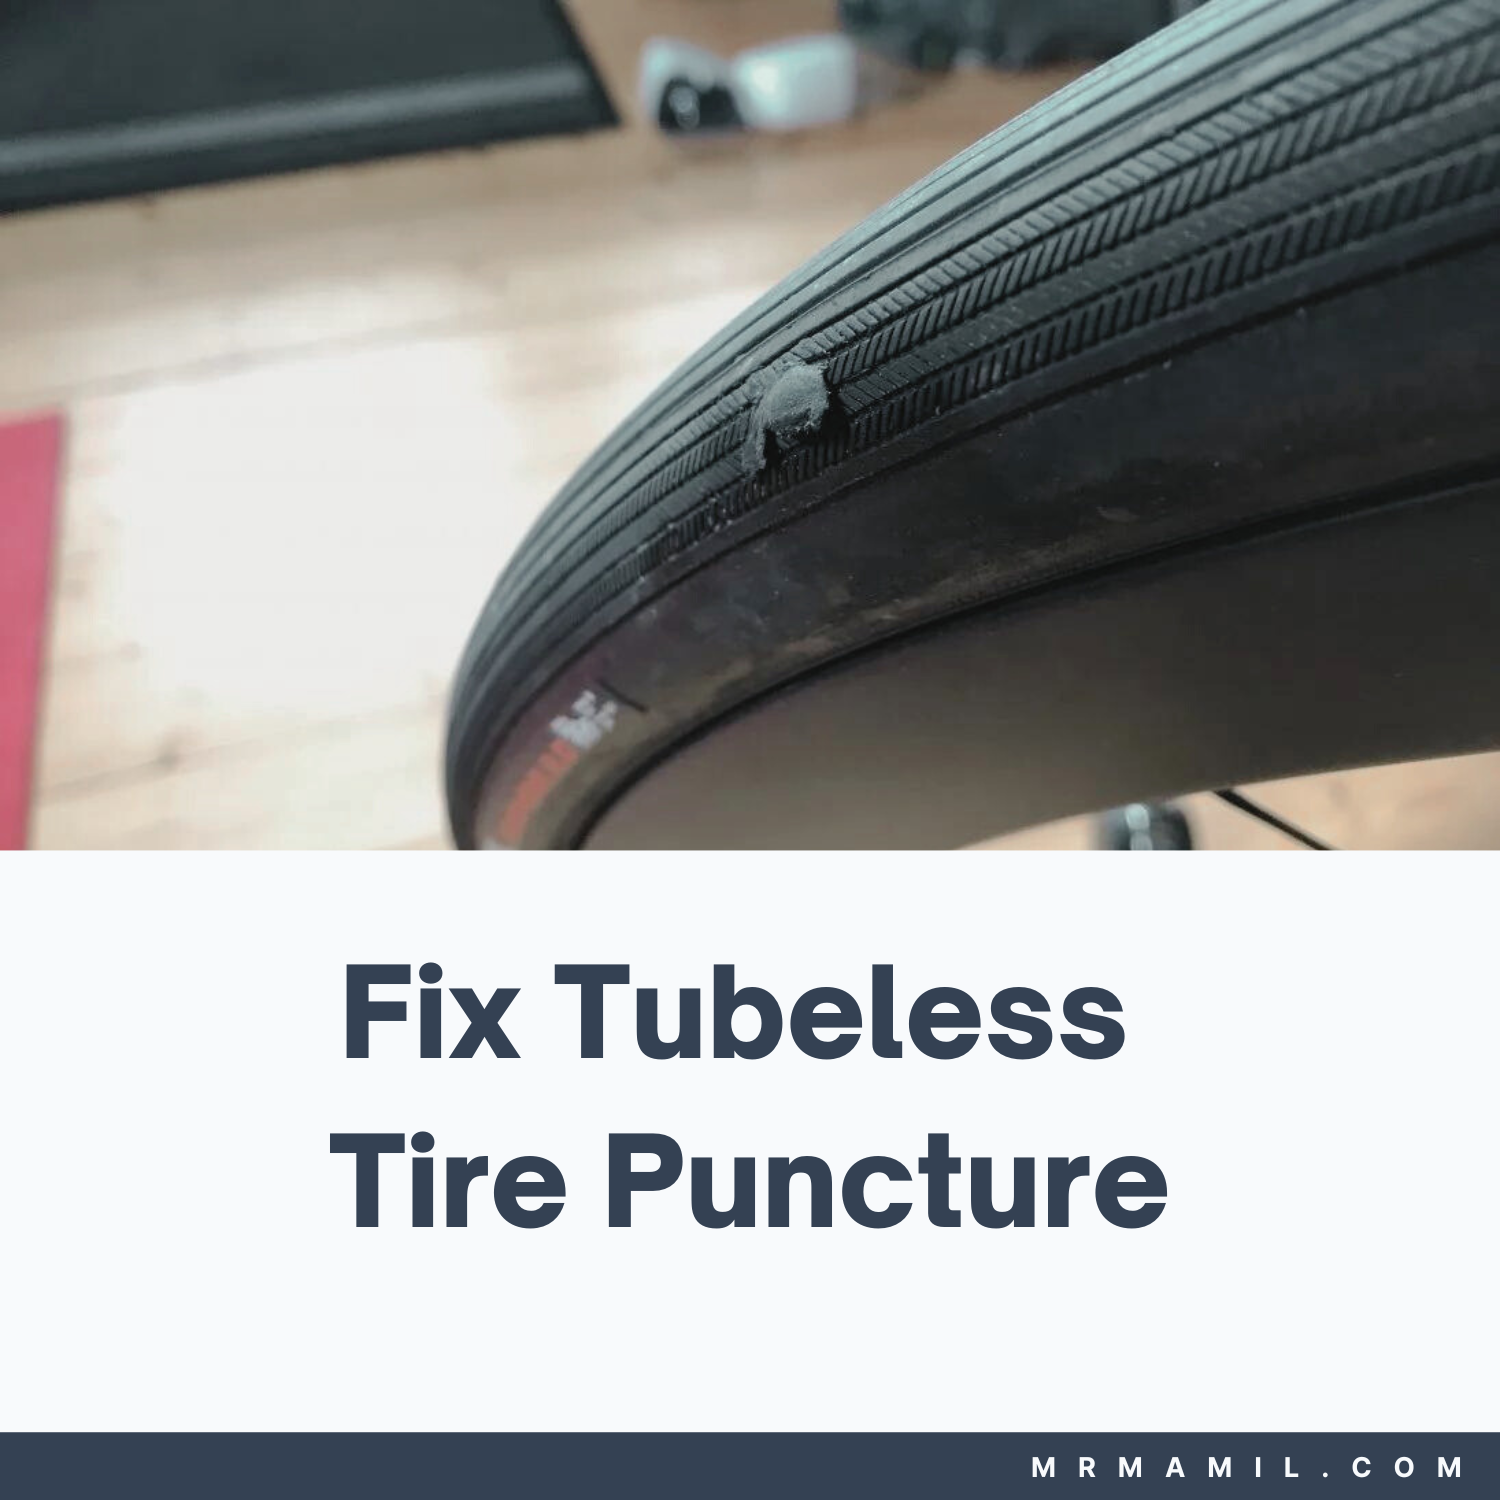 How to Fix Tubeless Tire Puncture